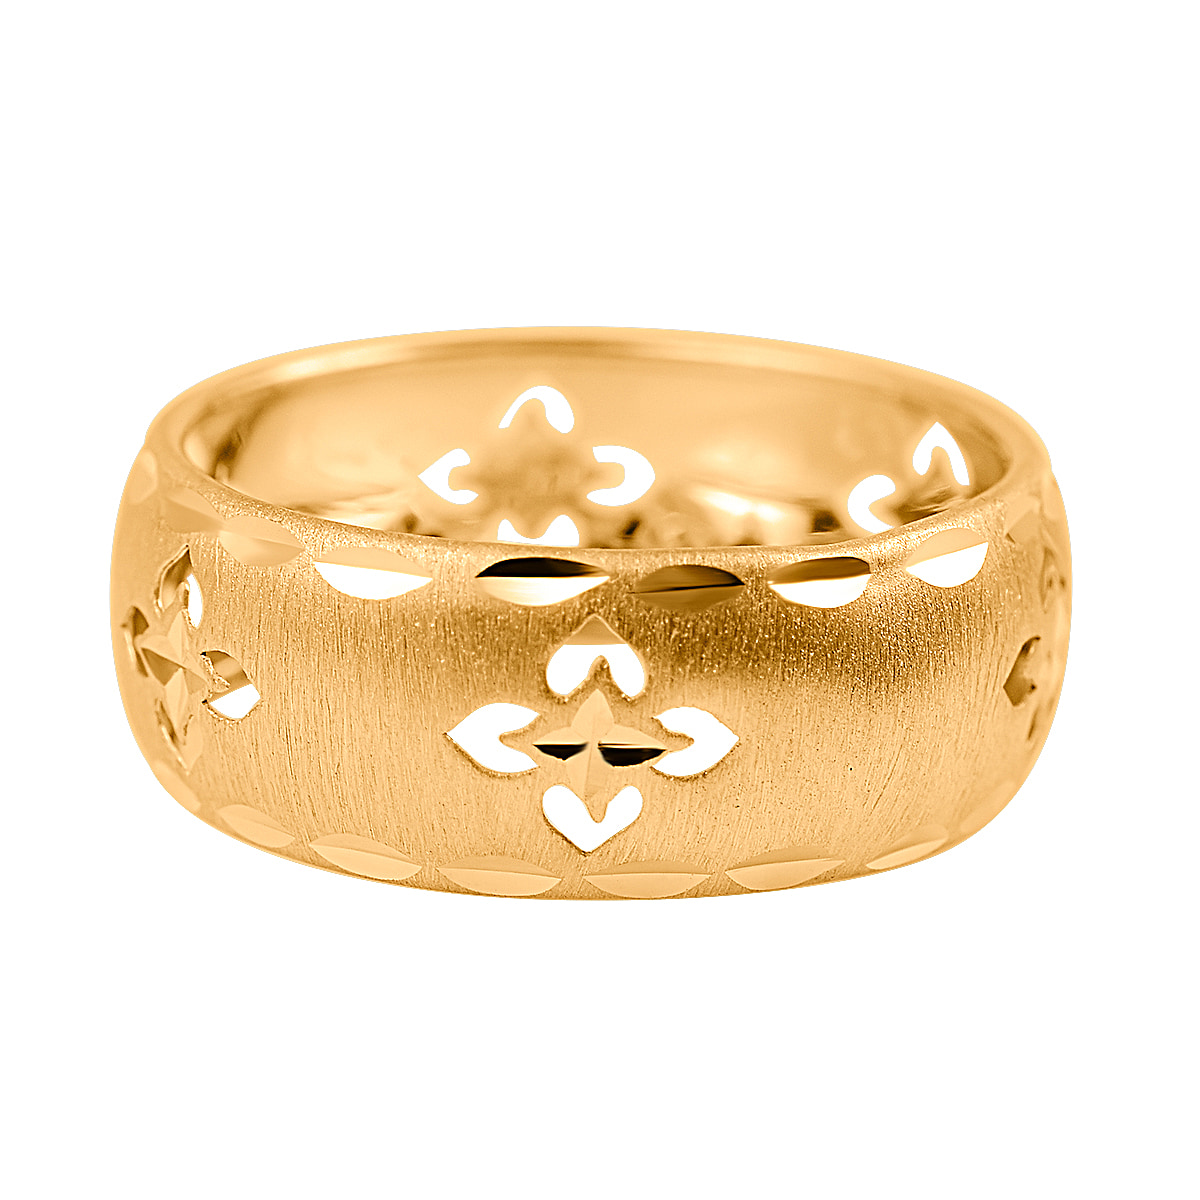 Maestro Collection - 9K Yellow Gold Clover Band Ring